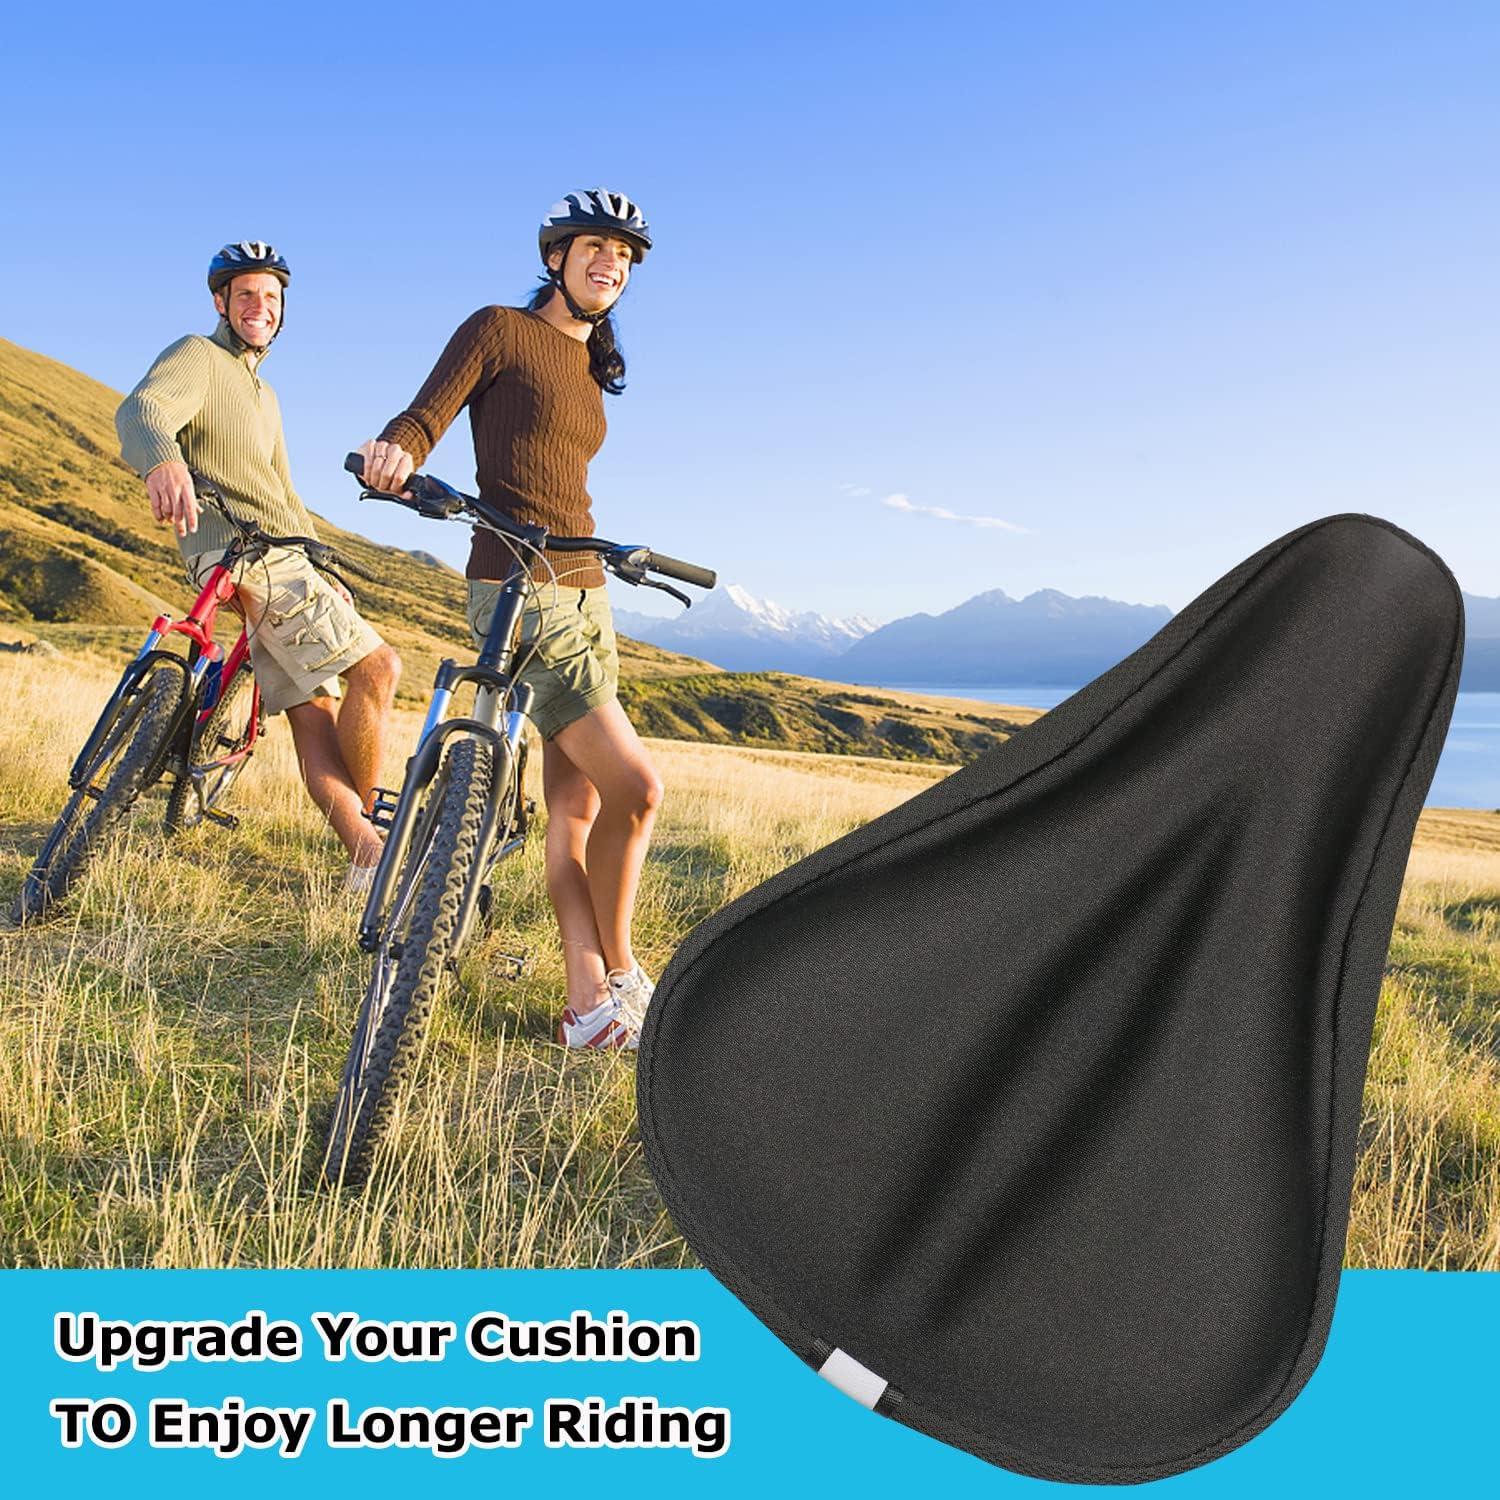 MERACH Exercise Bike Seat Cushion - Most Comfortable Gel Padded Bike Seat Cover for Men & Women, Compatible with Cruiser, Stationary Bike, Exercise